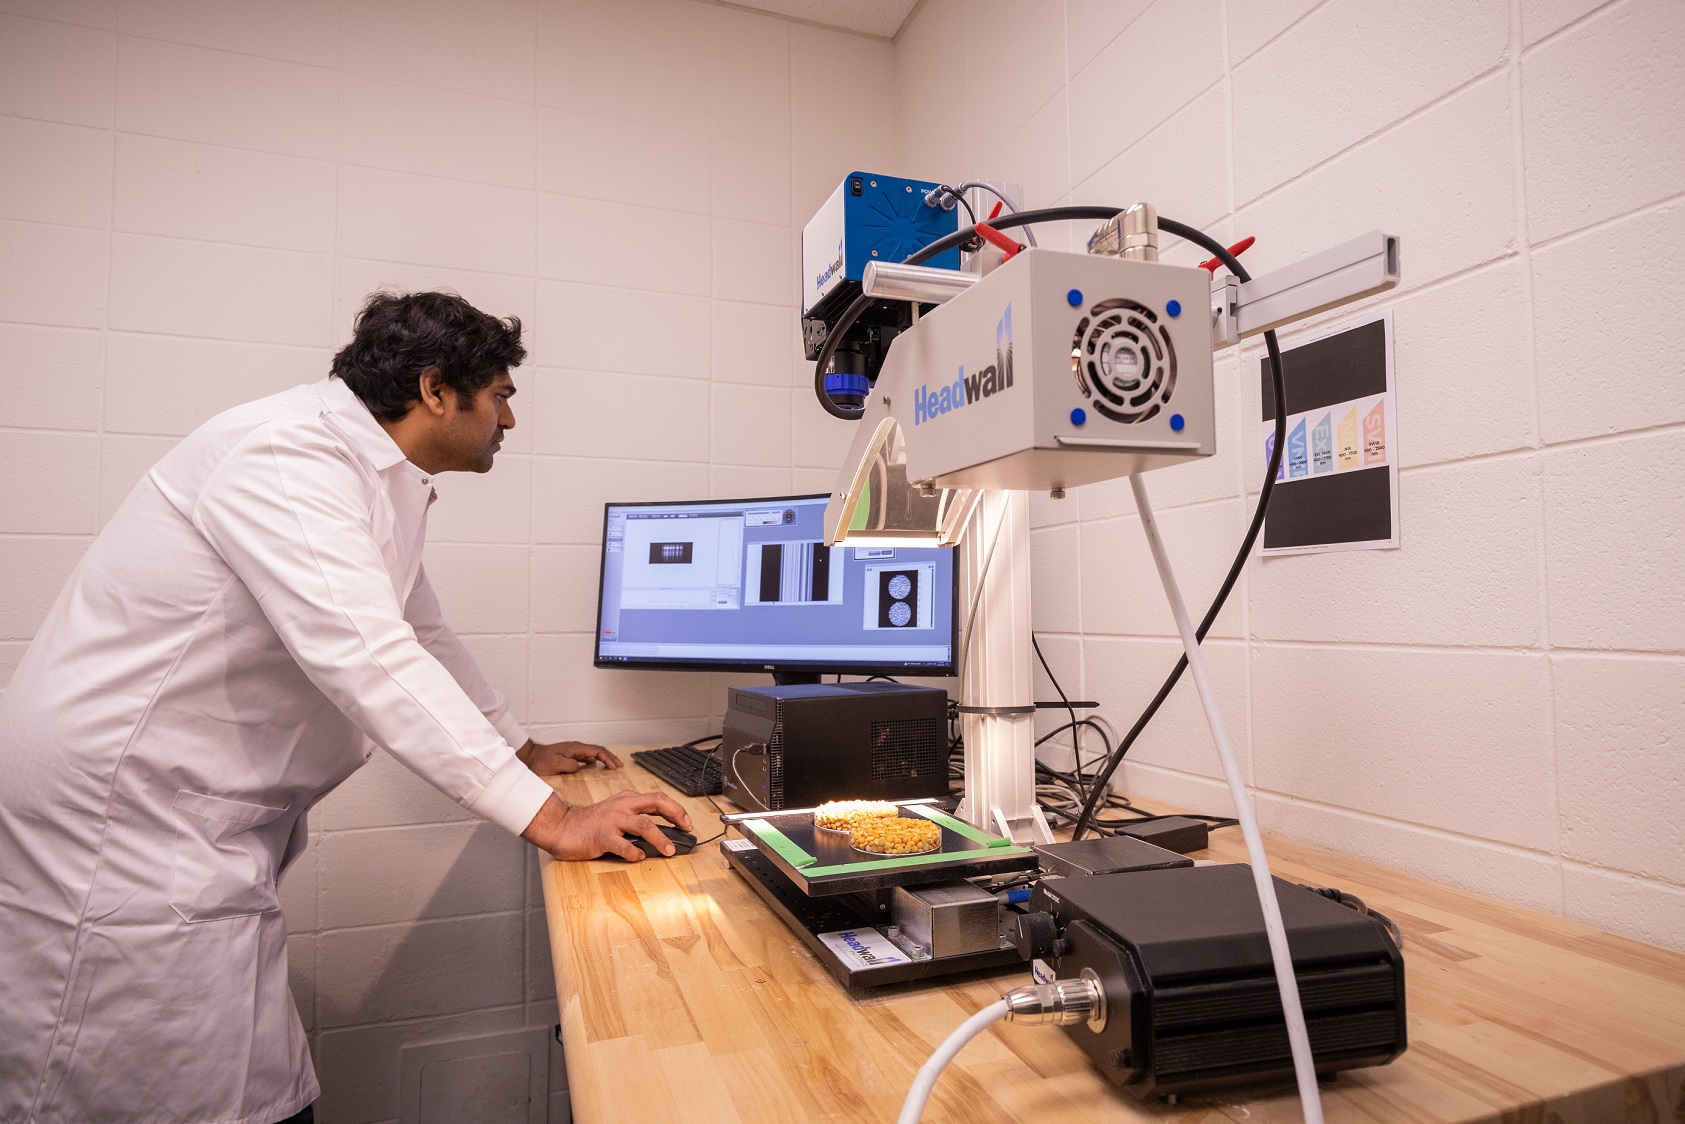 a researcher uses equipment in a lab space.